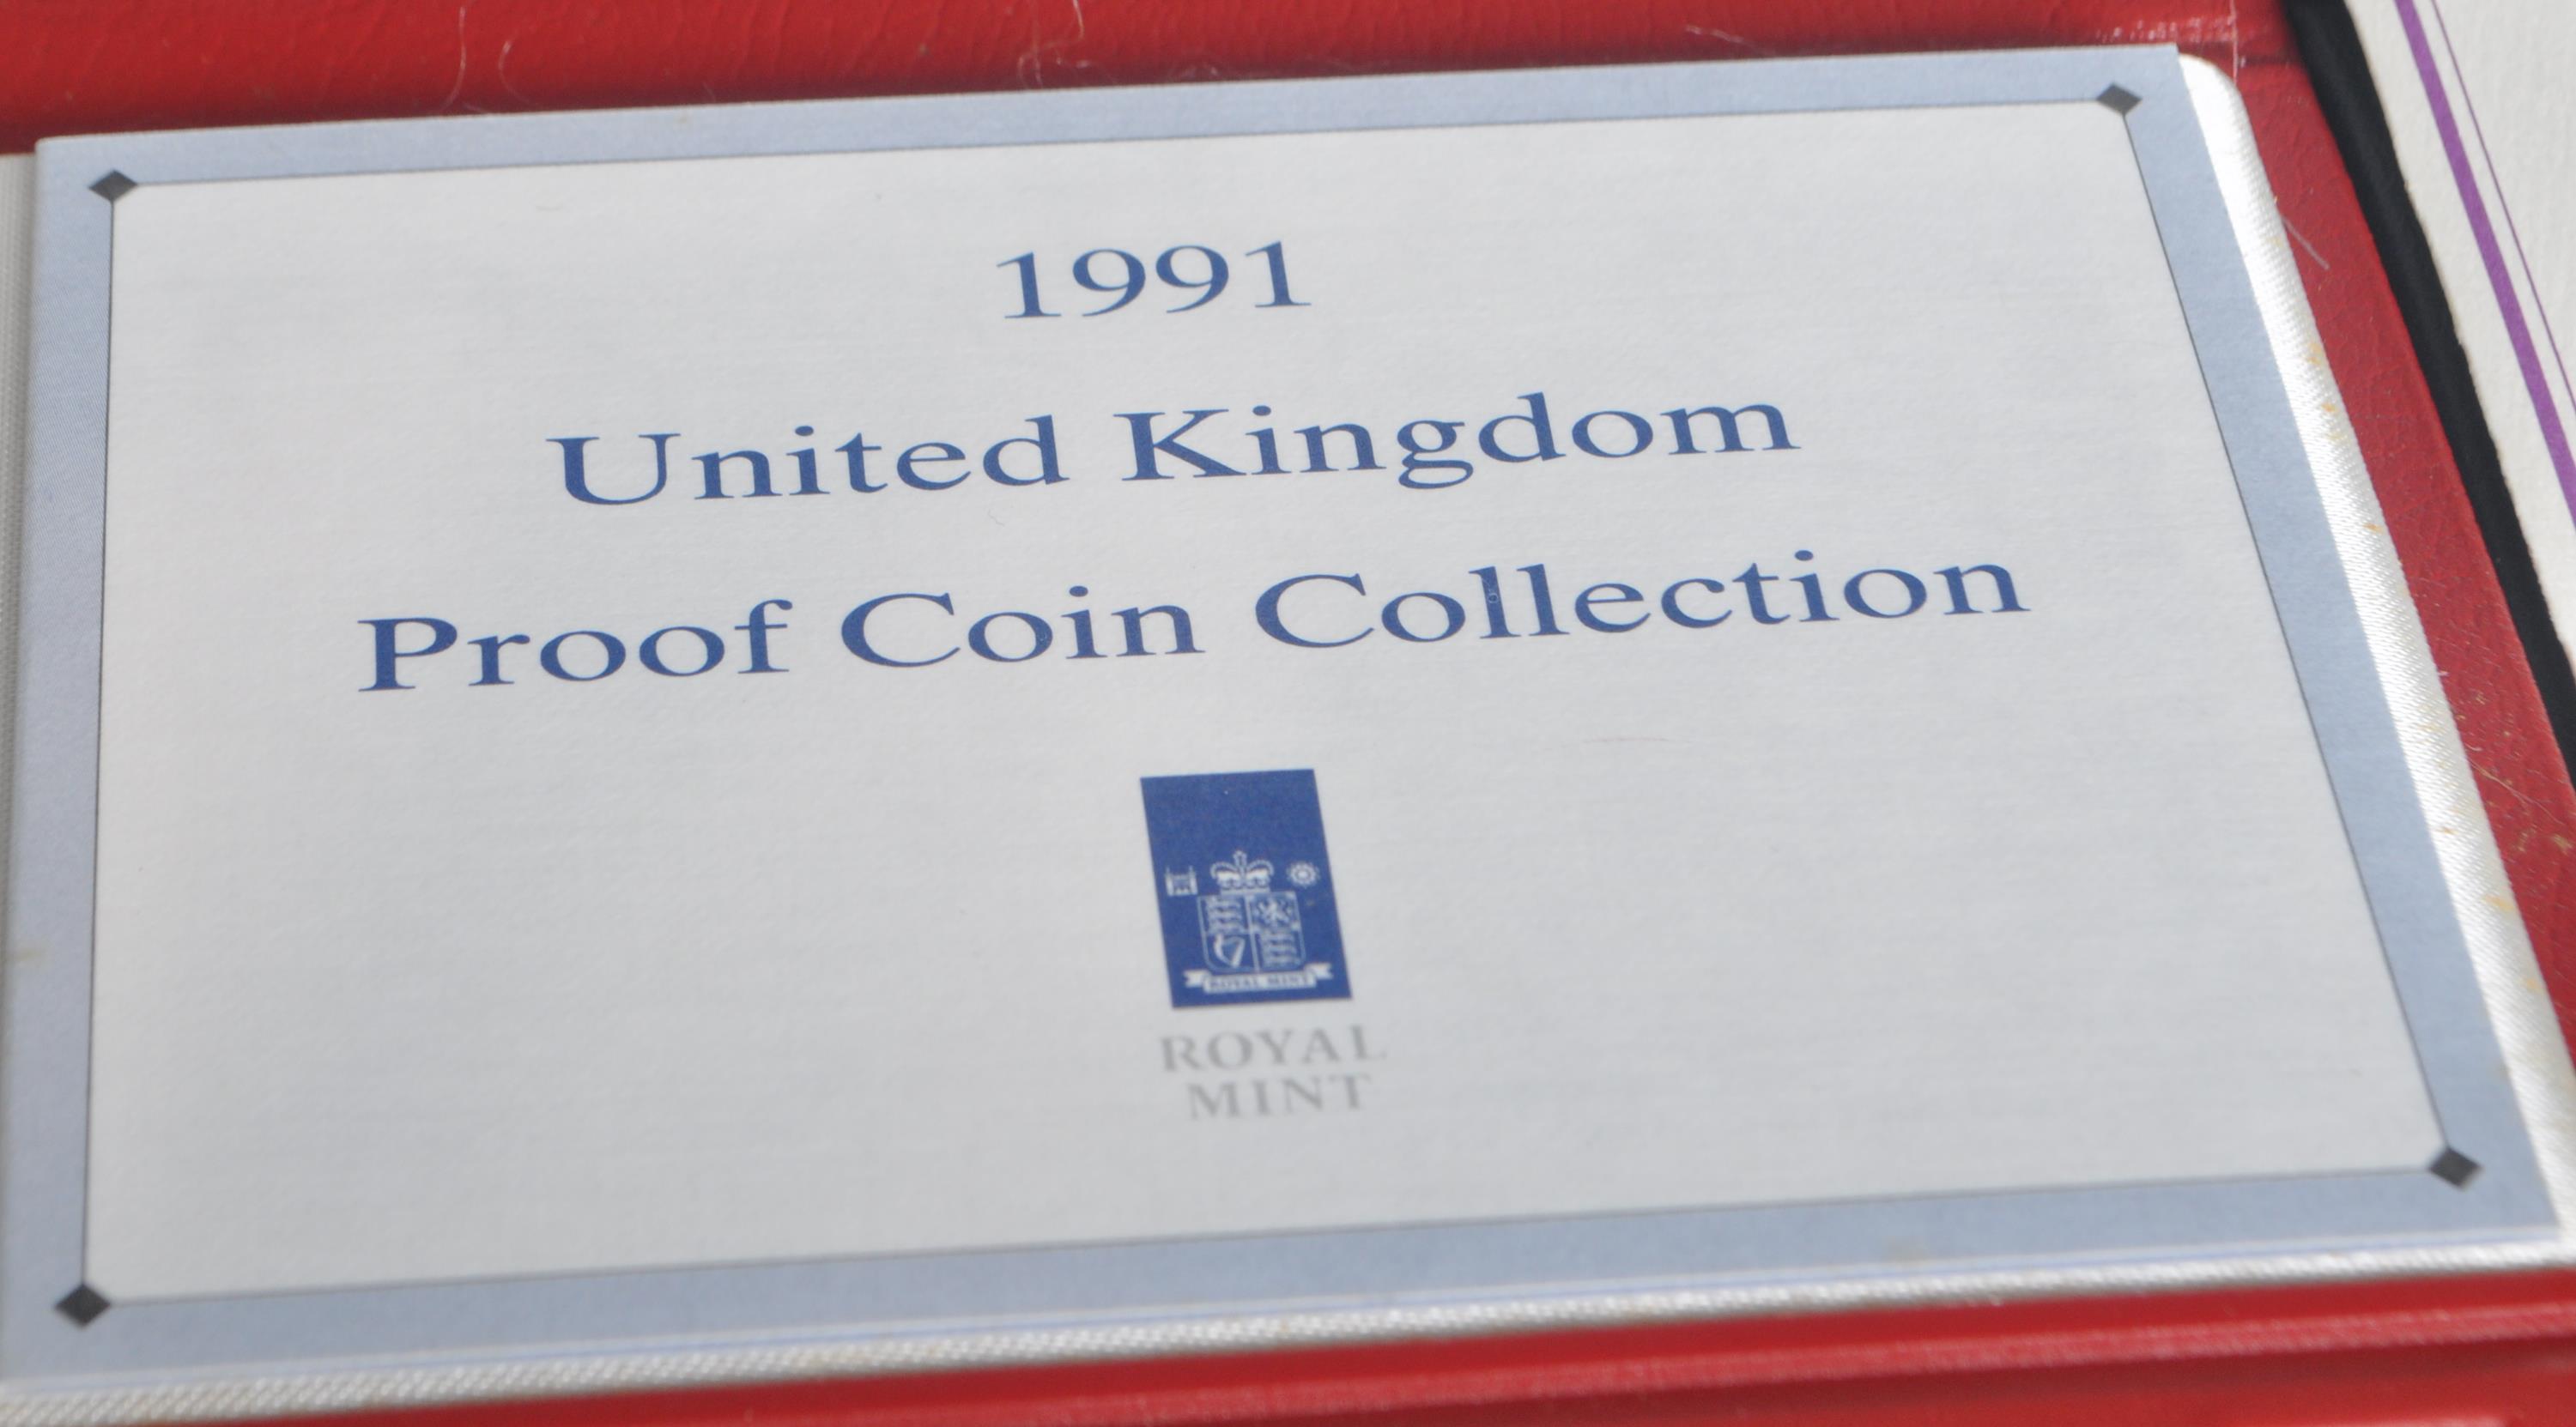 COLLECTION OF THREE UNITED KINGDOM PROOF COIN COLLECTION SETS - Image 5 of 5